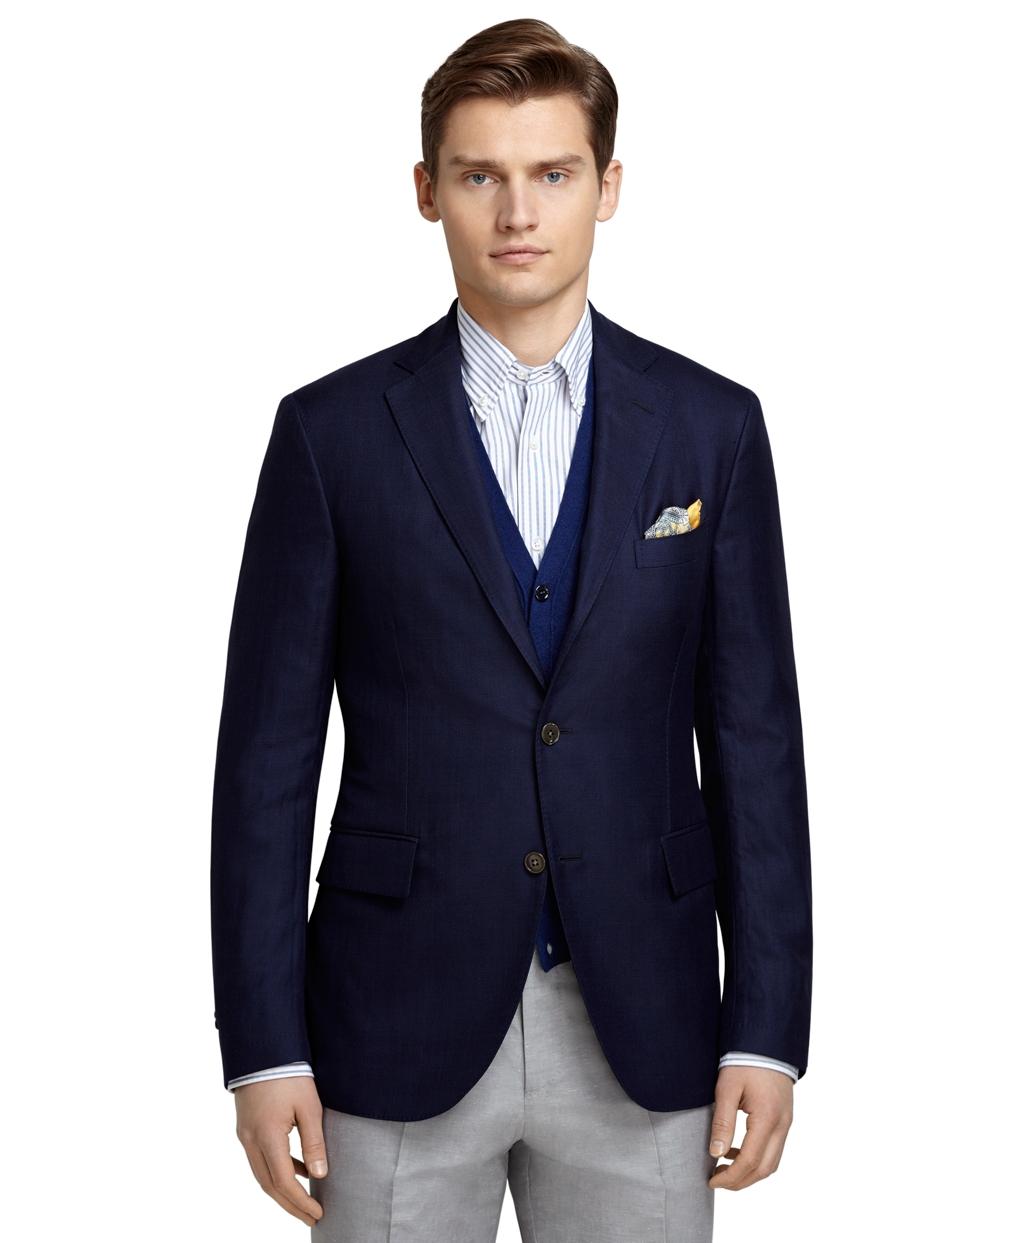 Brooks Brothers Three-button Navy Sport Coat in Blue for Men - Lyst